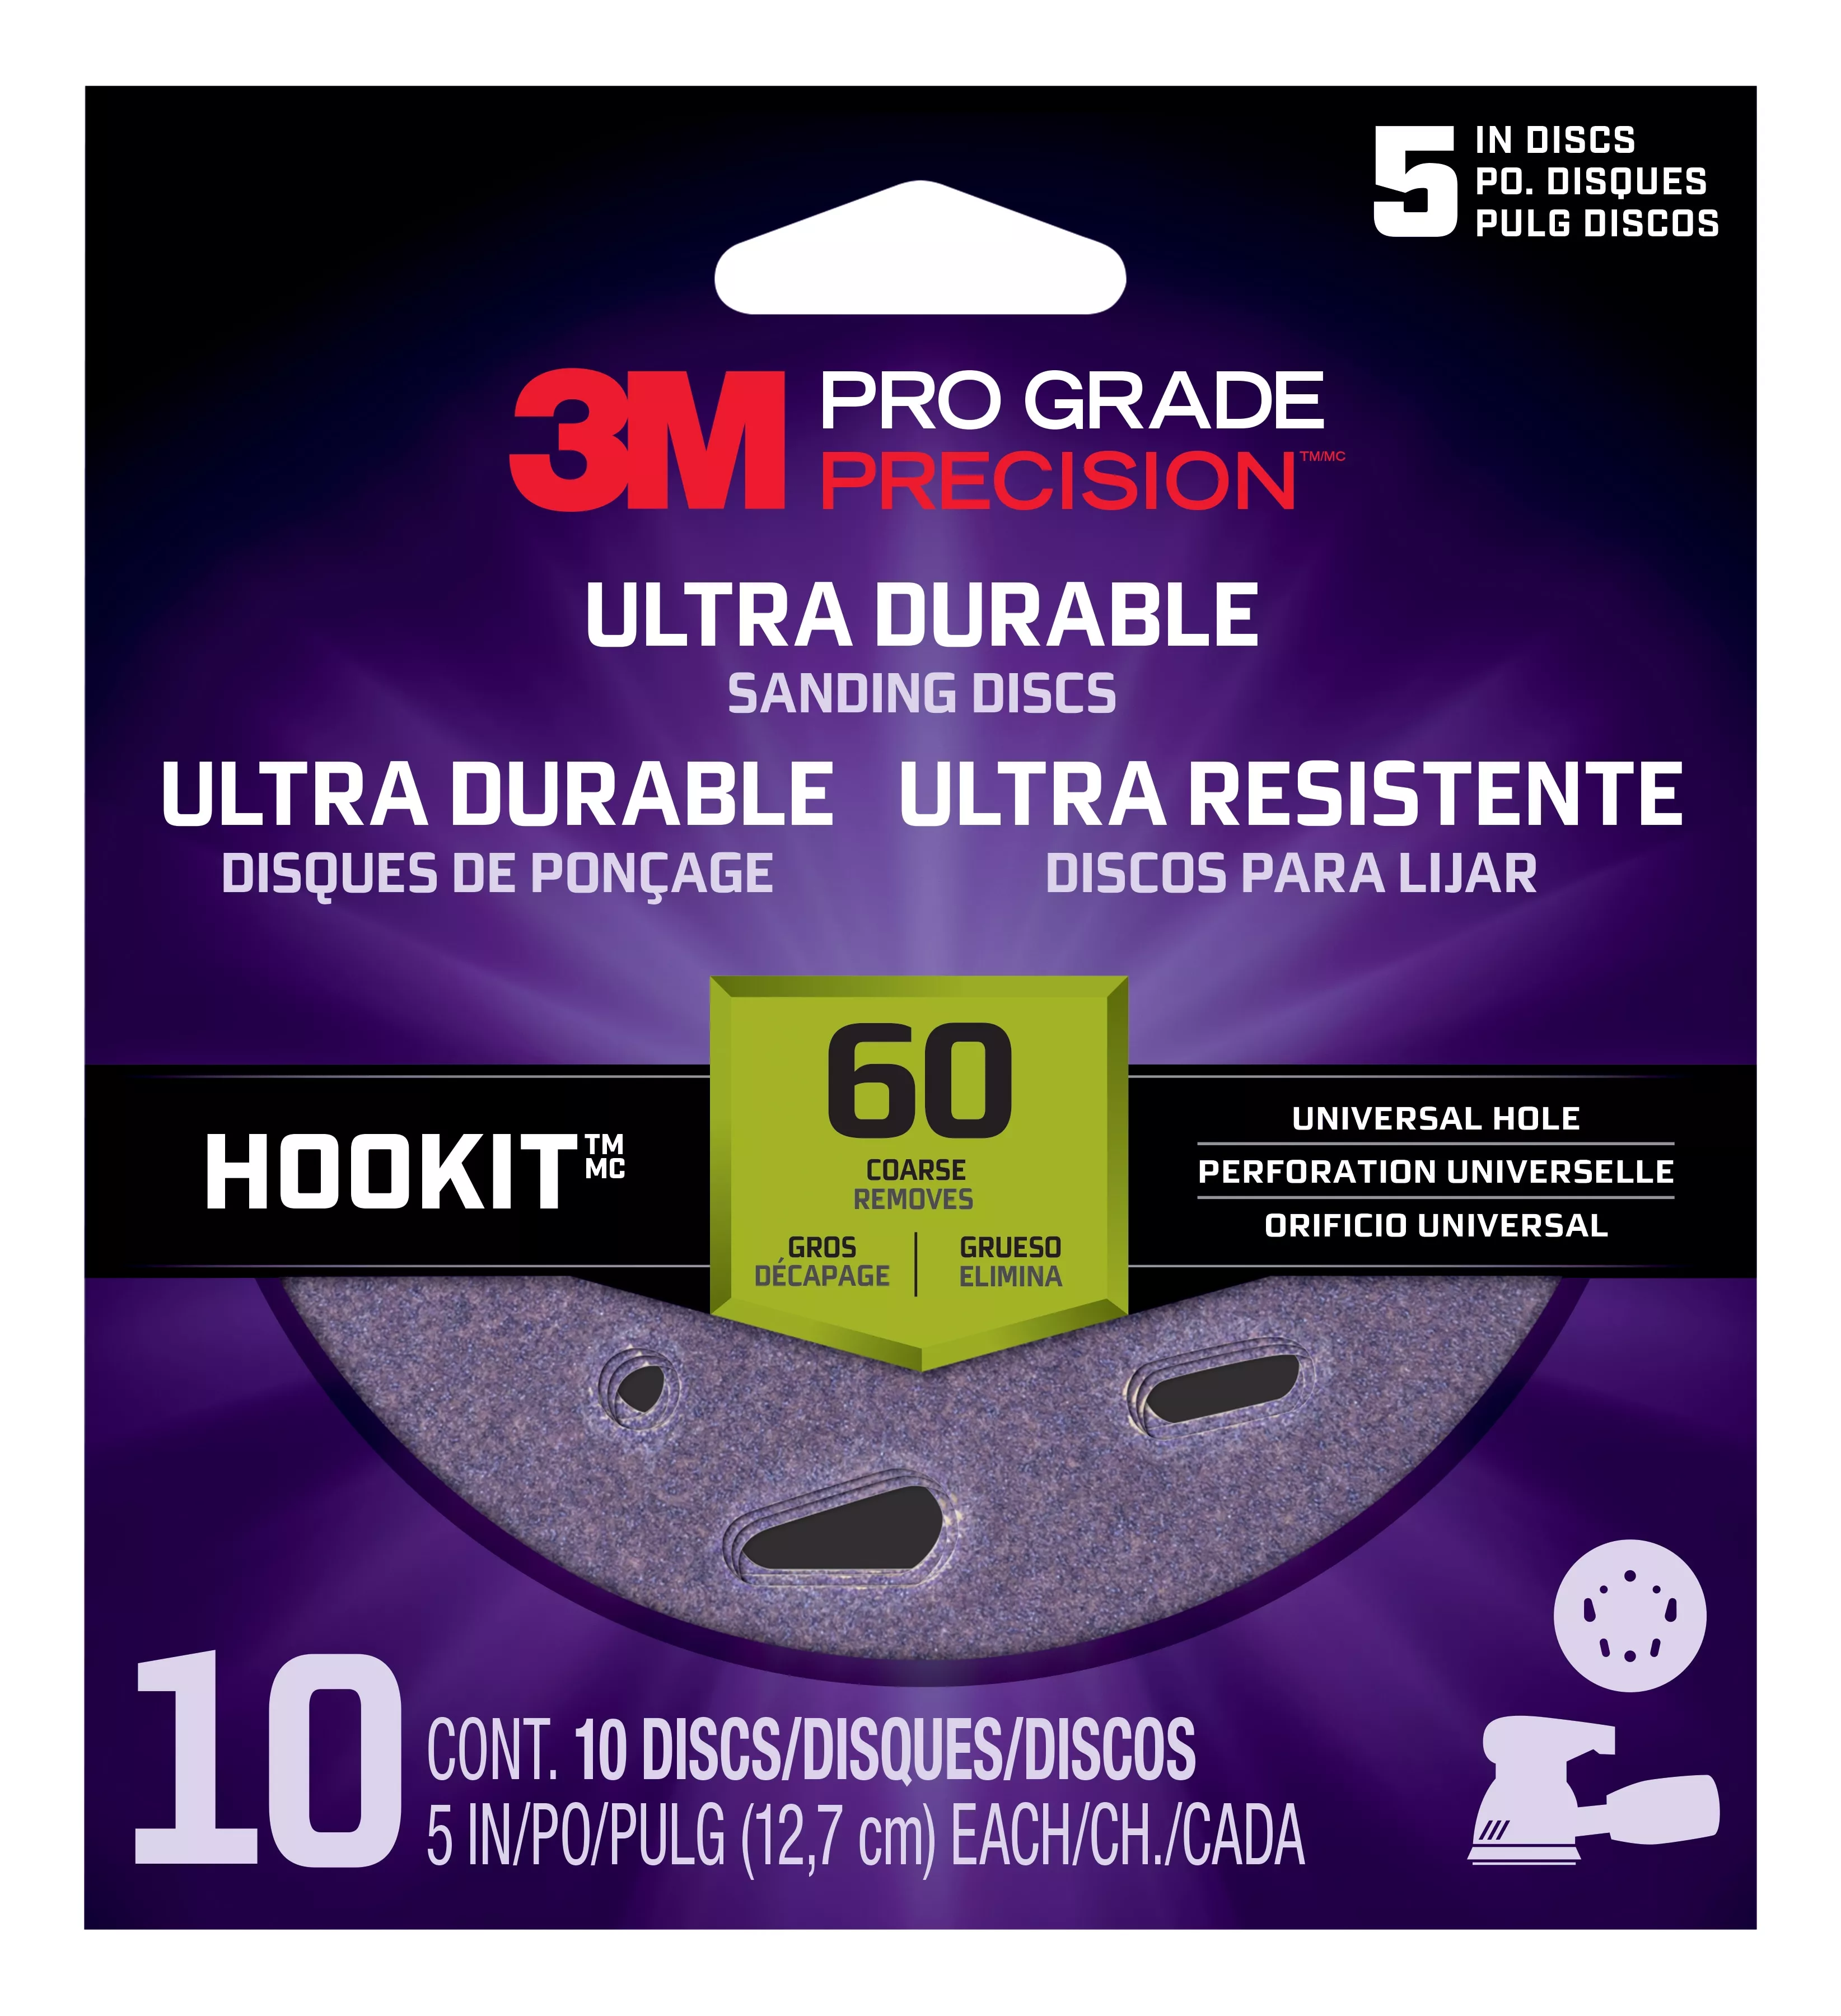 3M™ Pro Grade Precision™ Ultra Durable Universal Hole Sanding Disc,
DUH560TRI-10T, 5 IN x UH, 60, 10 pack